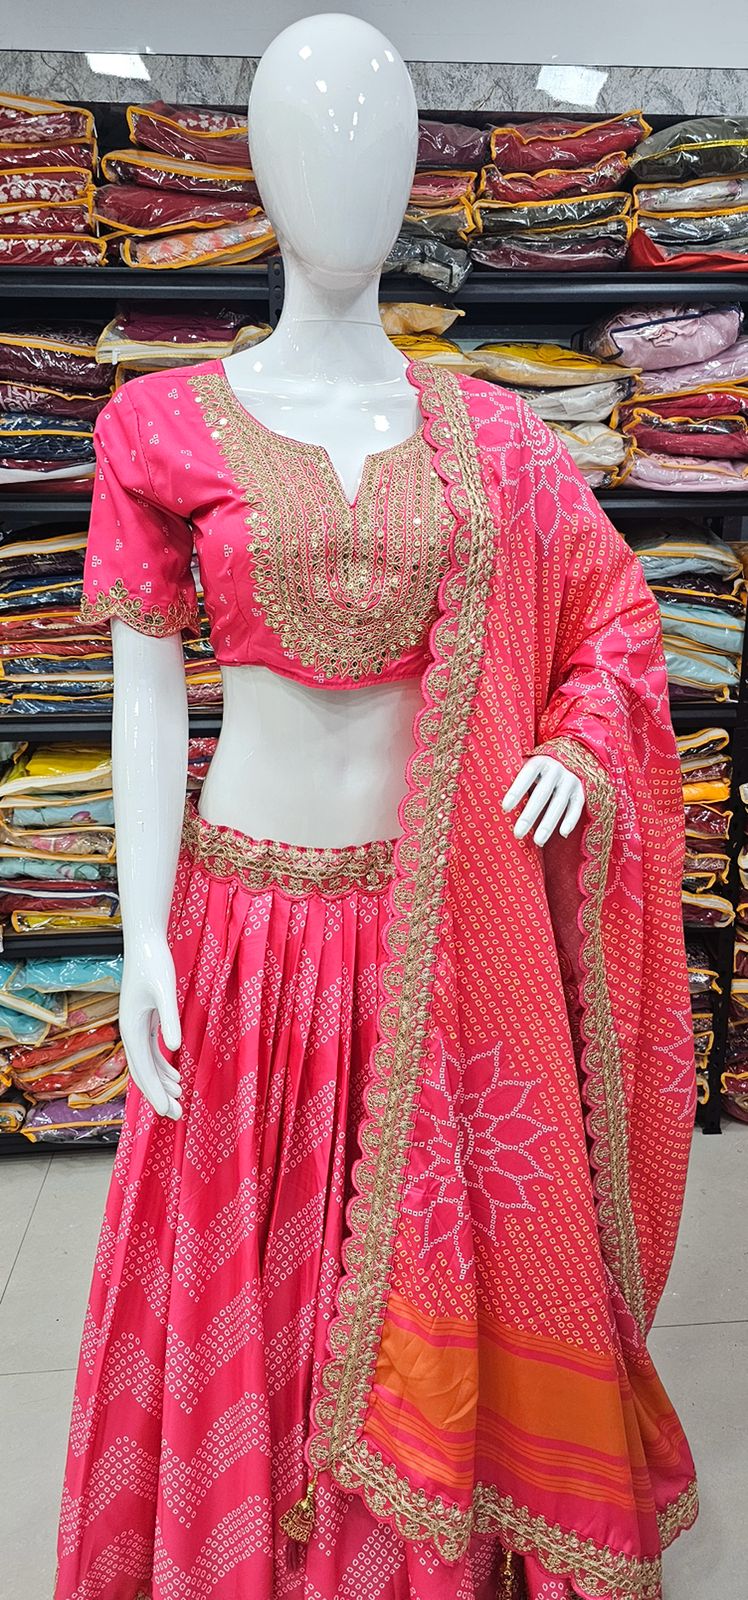 Elevate Your Style with our New Launch: Embroidery Work Digital Print Lehenga Choli